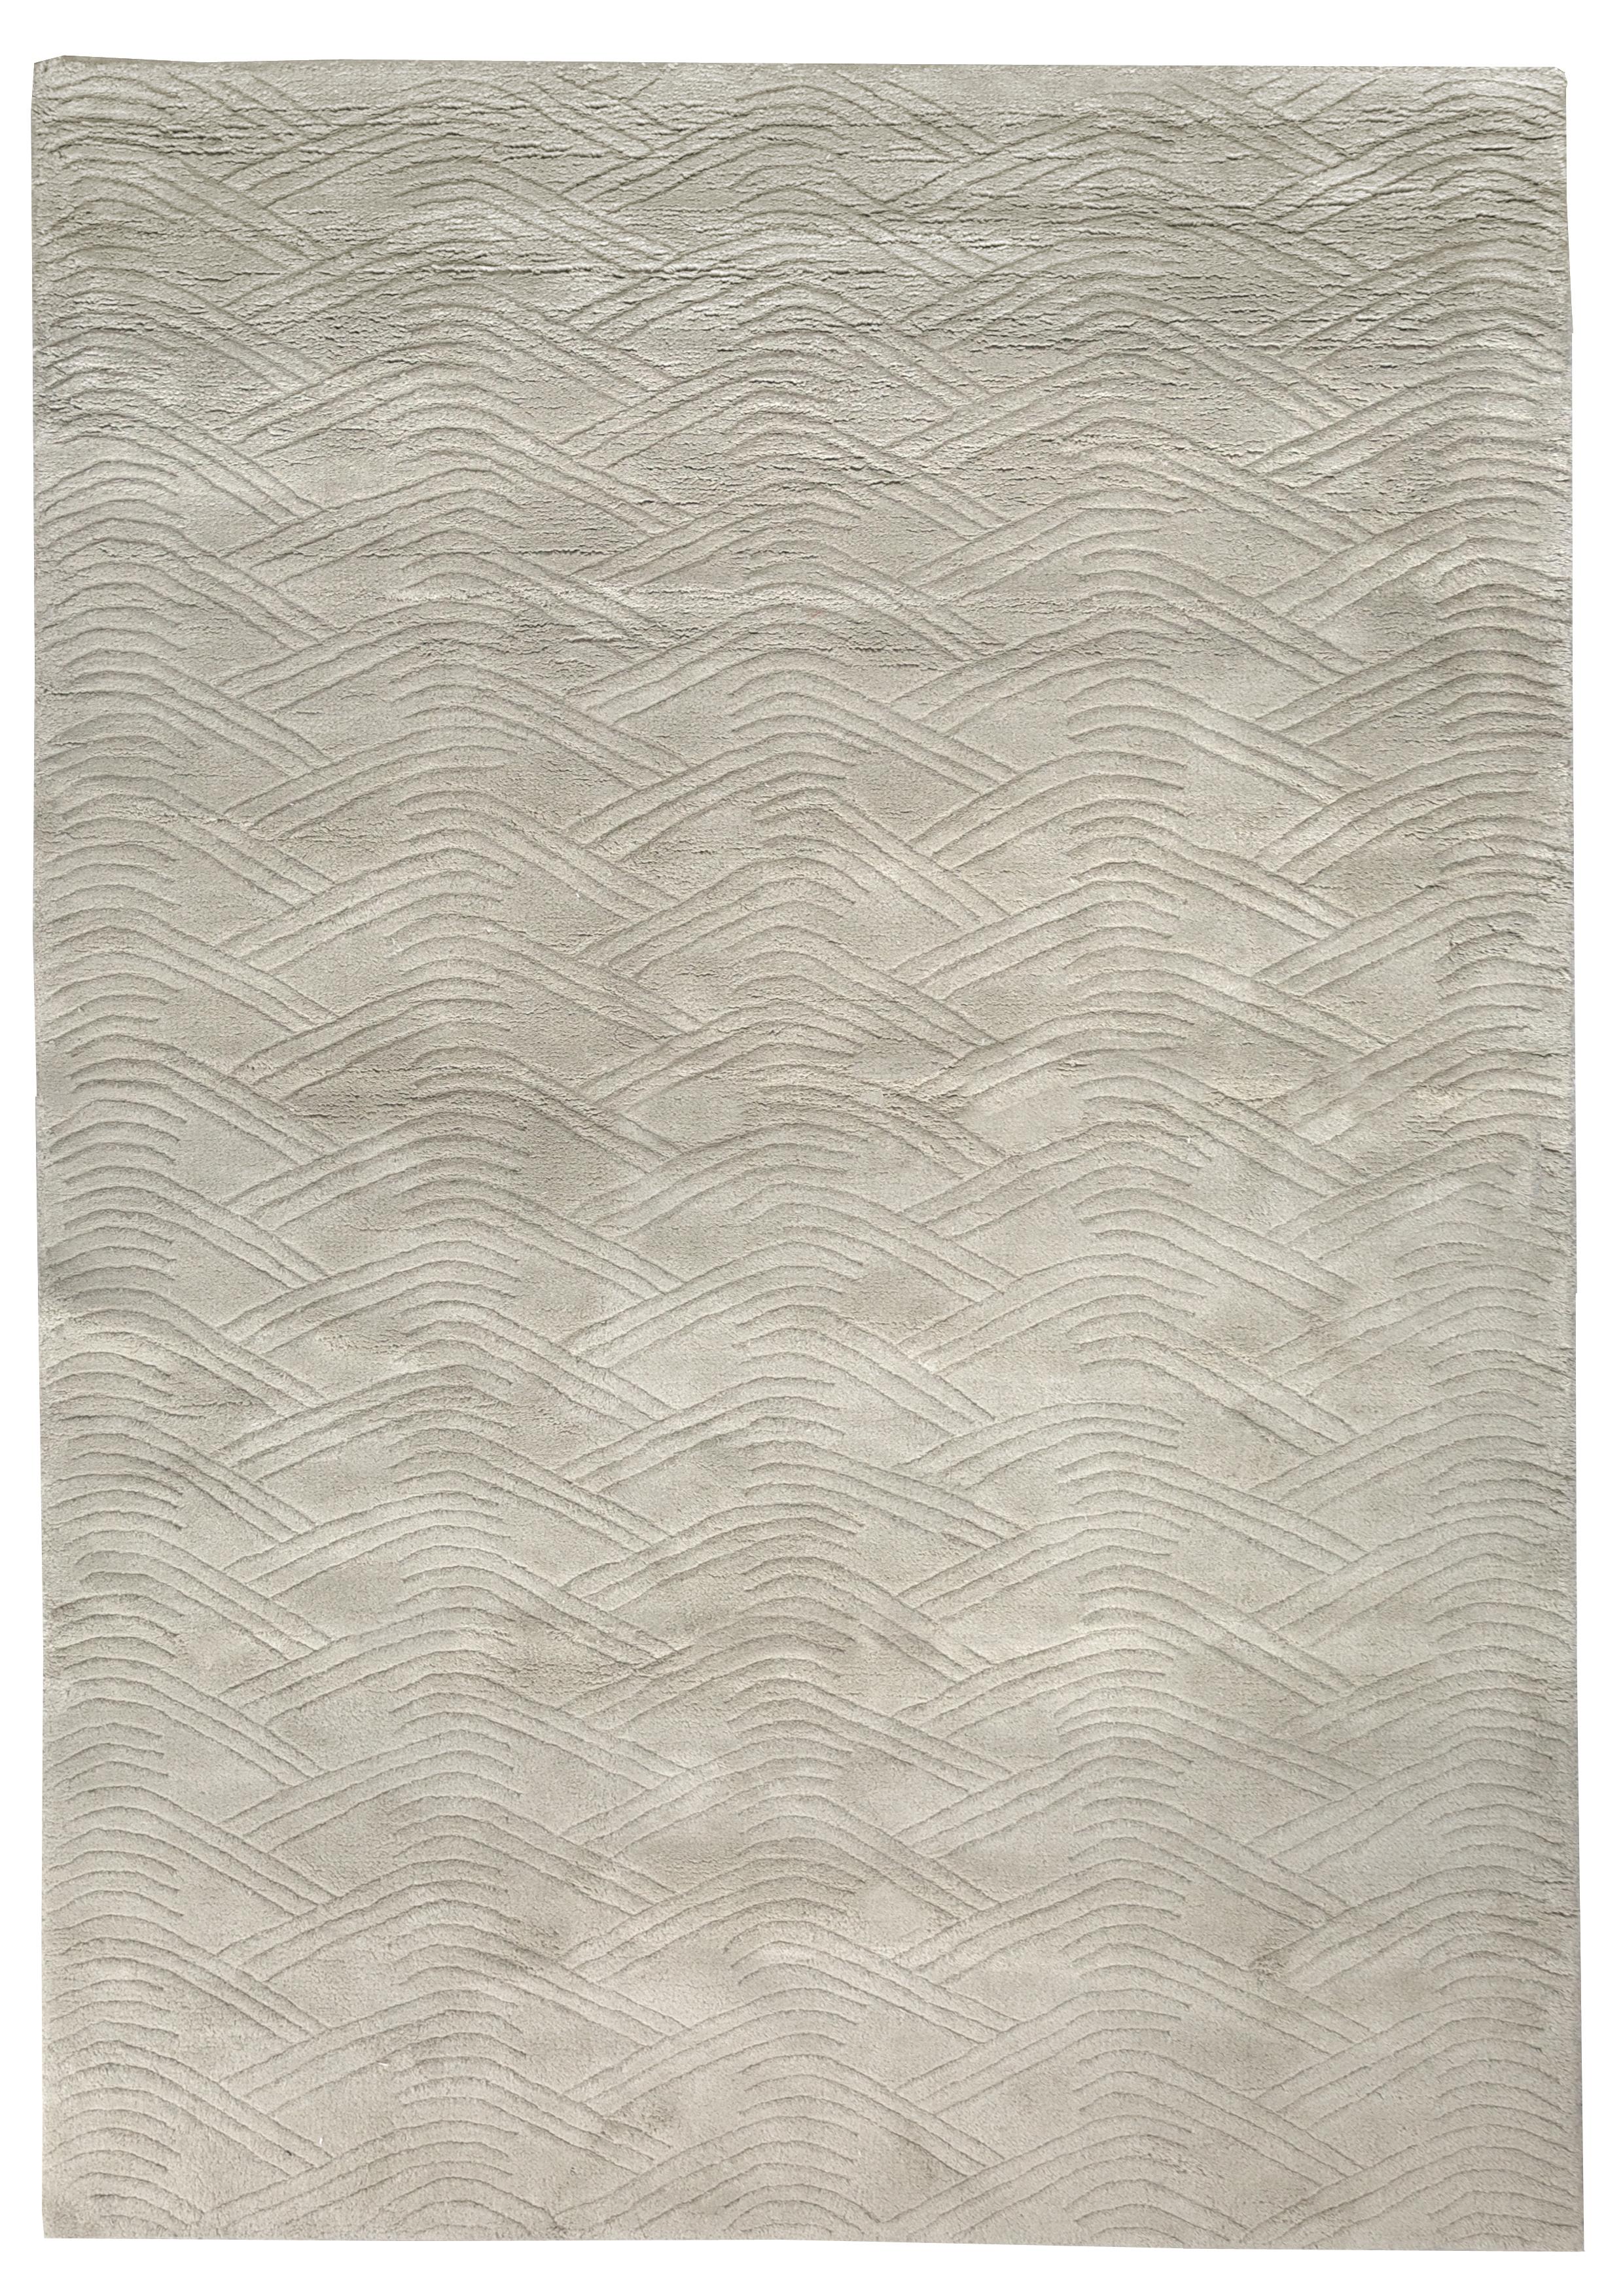 Hand-Woven Curved Line Pattern Customizable Voyage Weave Rug in Dove Large For Sale